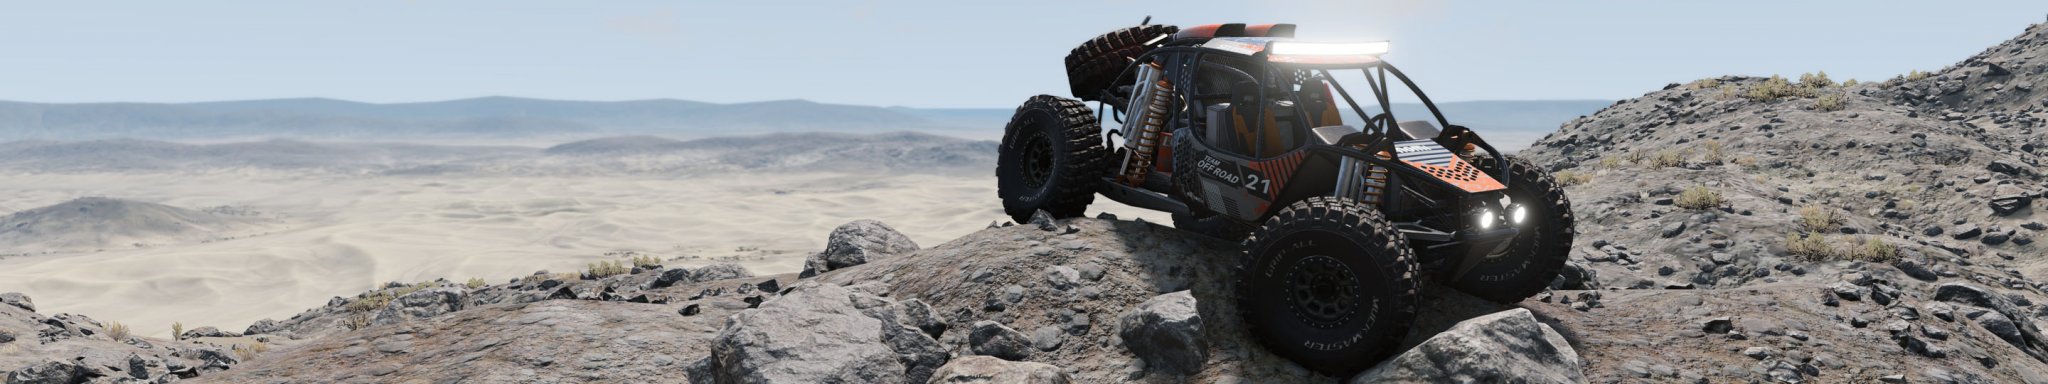 3 BeamNG 3 VEHICLES and ROCK BASHER copy.jpg